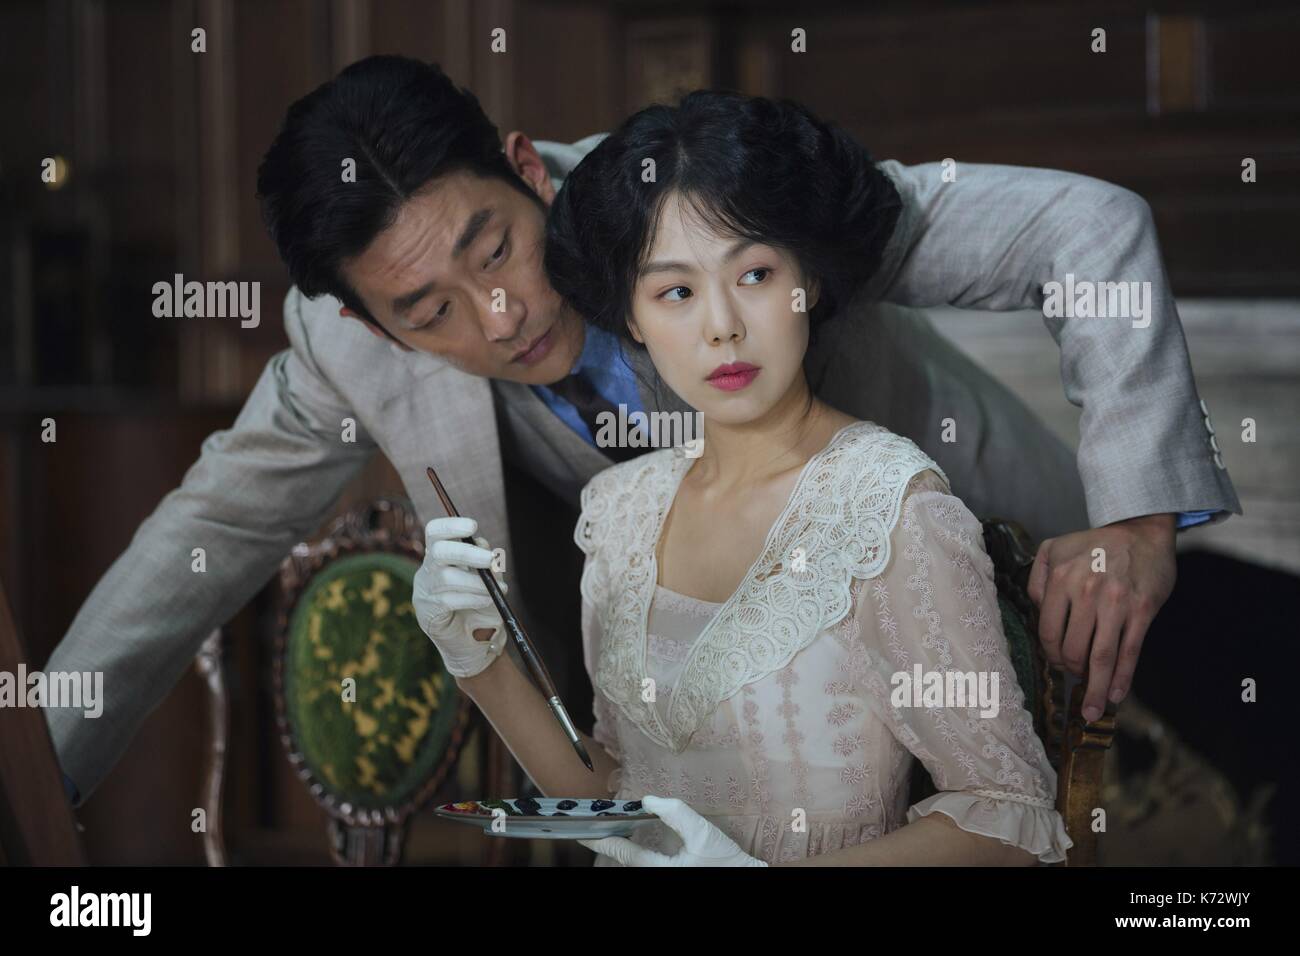 The Handmaiden  Ah-ga-ssi  Year : 2016 South Korea  Director : Chan-wook Park  Jin-woong Jo, Min-hee Kim, Jung-woo Ha     Photo: Jae-Hyeok Lee.  It is forbidden to reproduce the photograph out of context of the promotion of the film. It must be credited to the Film Company and/or the photographer assigned by or authorized by/allowed on the set by the Film Company. Restricted to Editorial Use. Photo12 does not grant publicity rights of the persons represented. Stock Photo